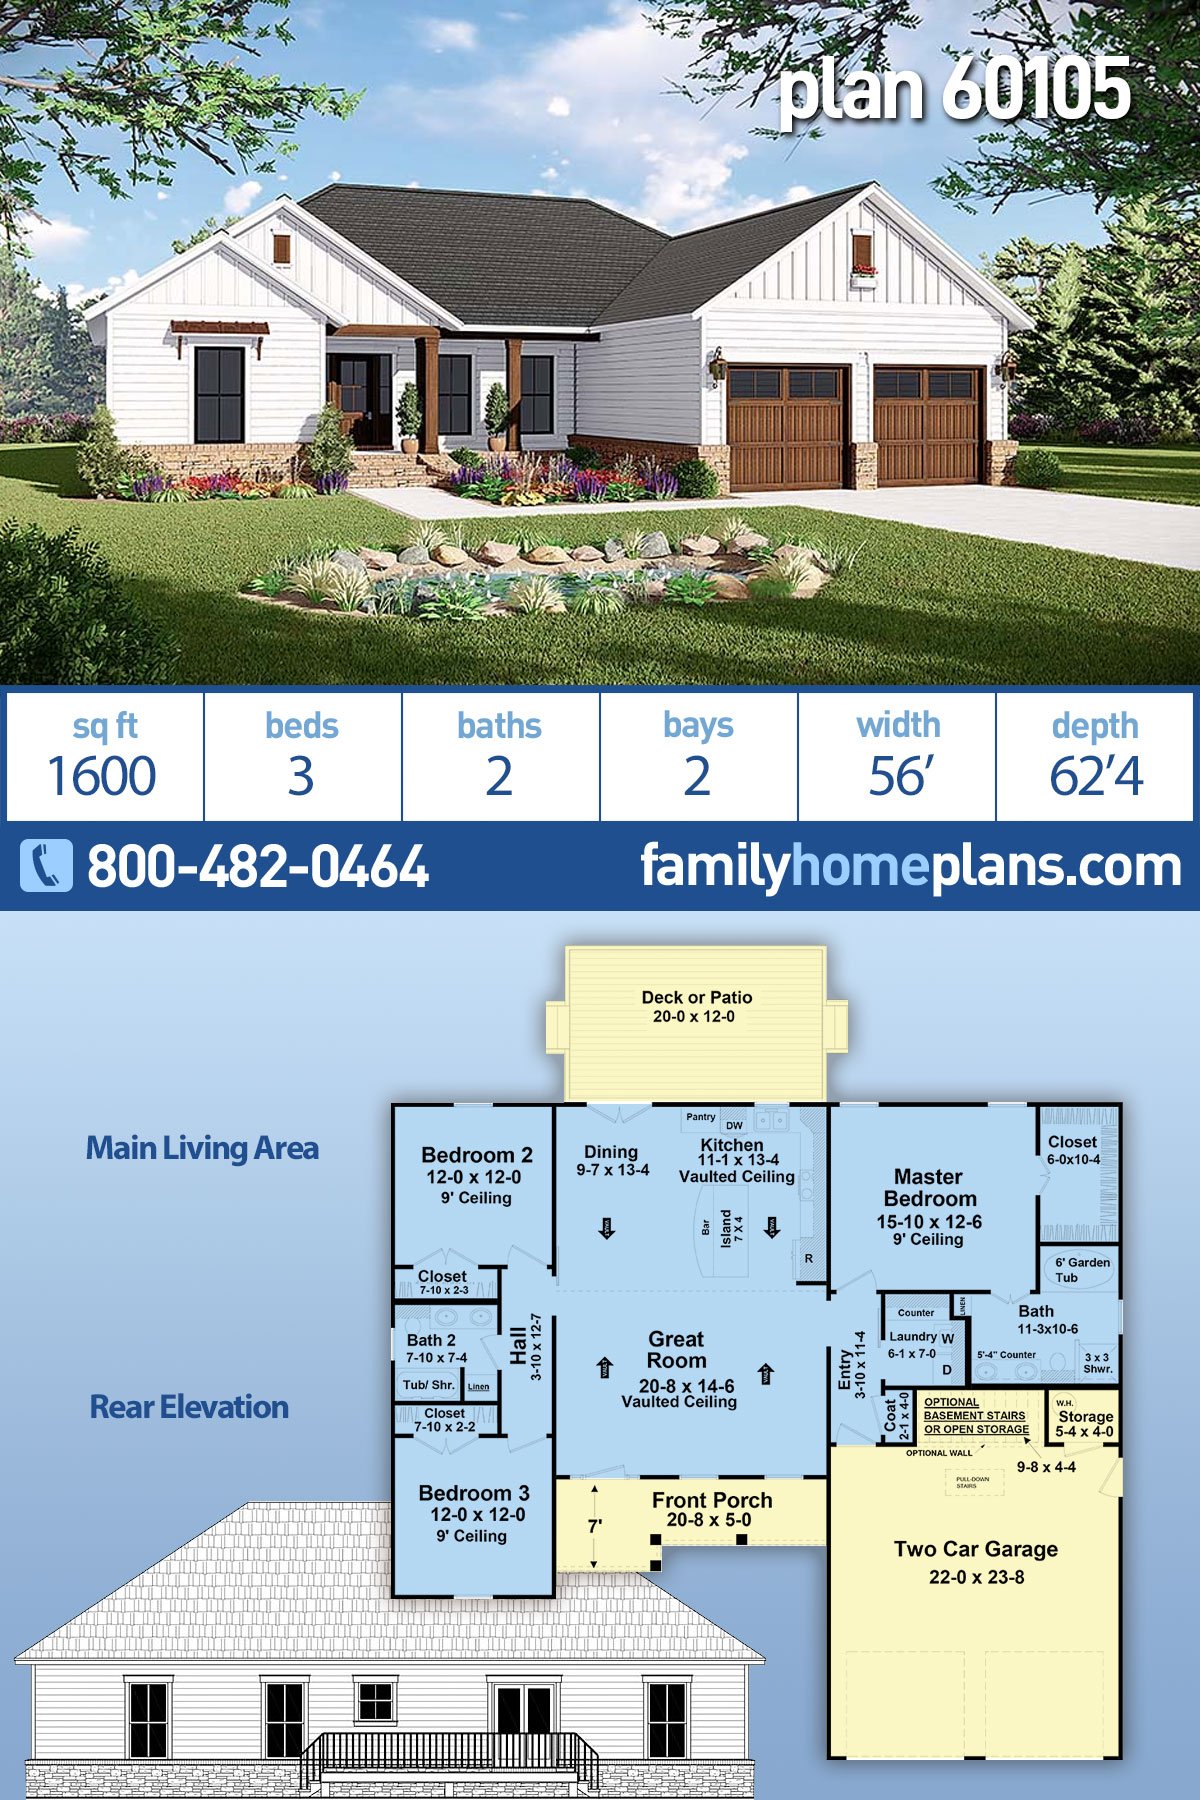 Country, Farmhouse, Ranch, Traditional House Plan 60105 with 3 Beds, 2 Baths, 2 Car Garage